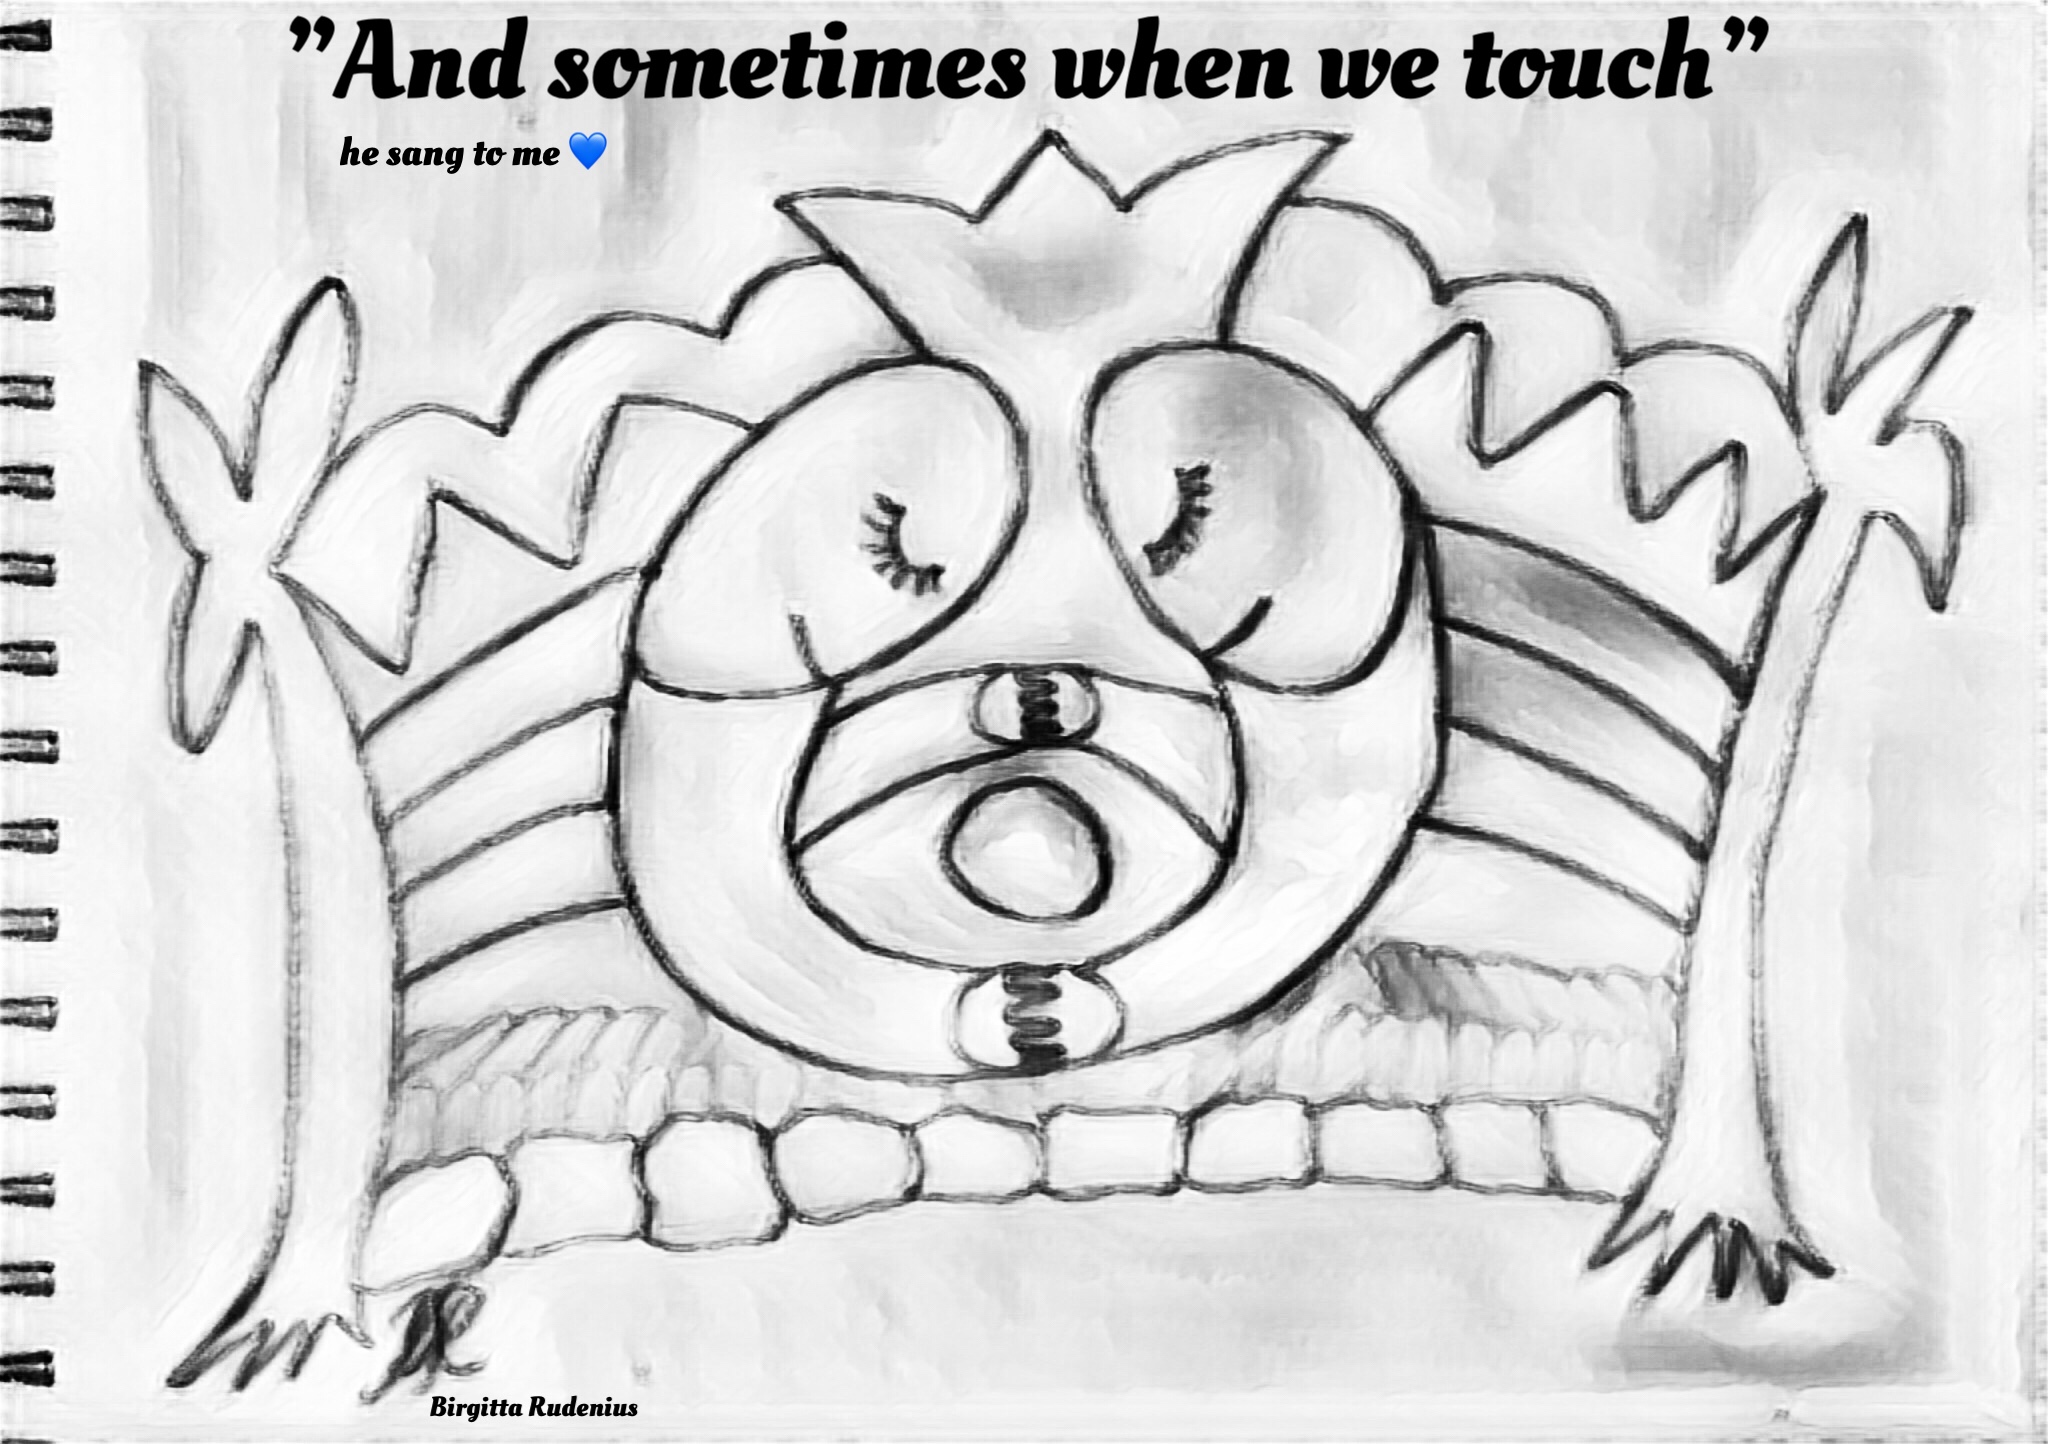 Sometimes when we touch